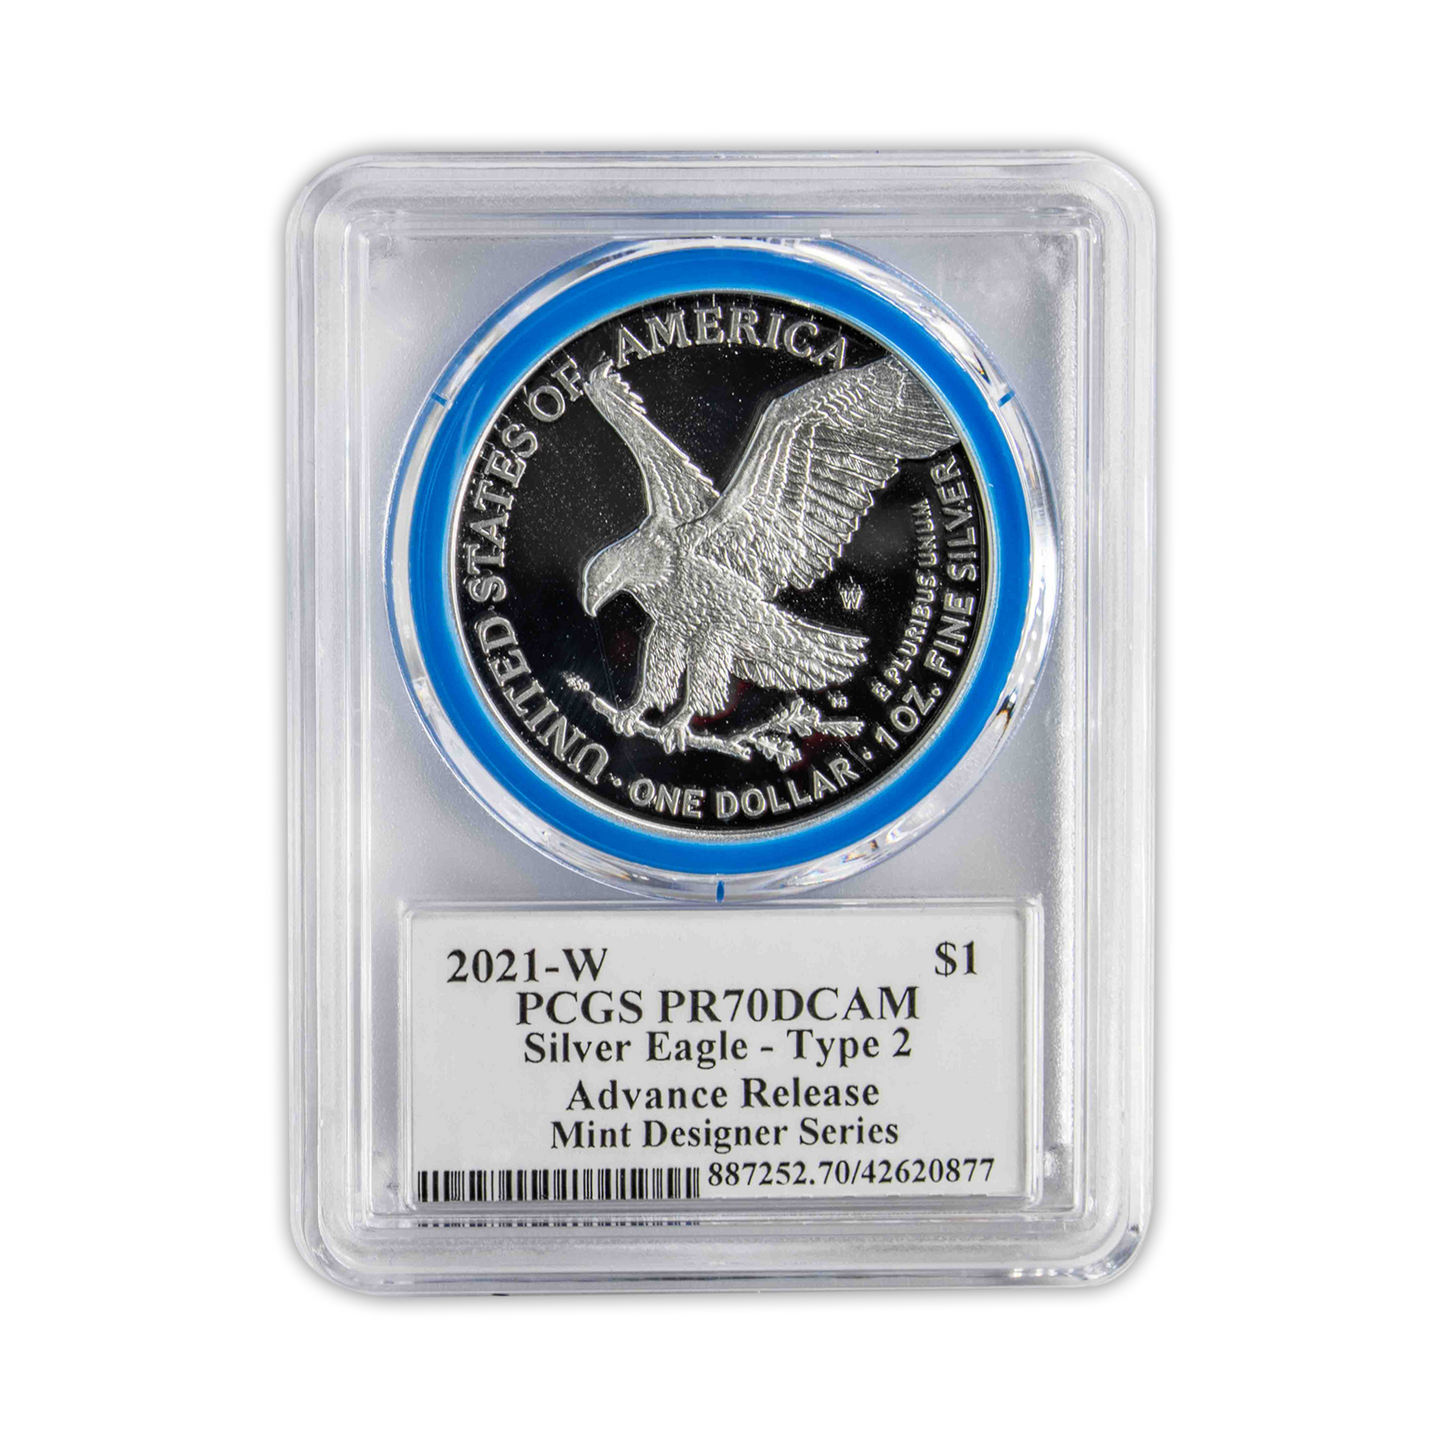 2021 Silver Eagle Type 2 Proof - PCGS PR70 AR Advanced Release - Emily Damstra Signature Label